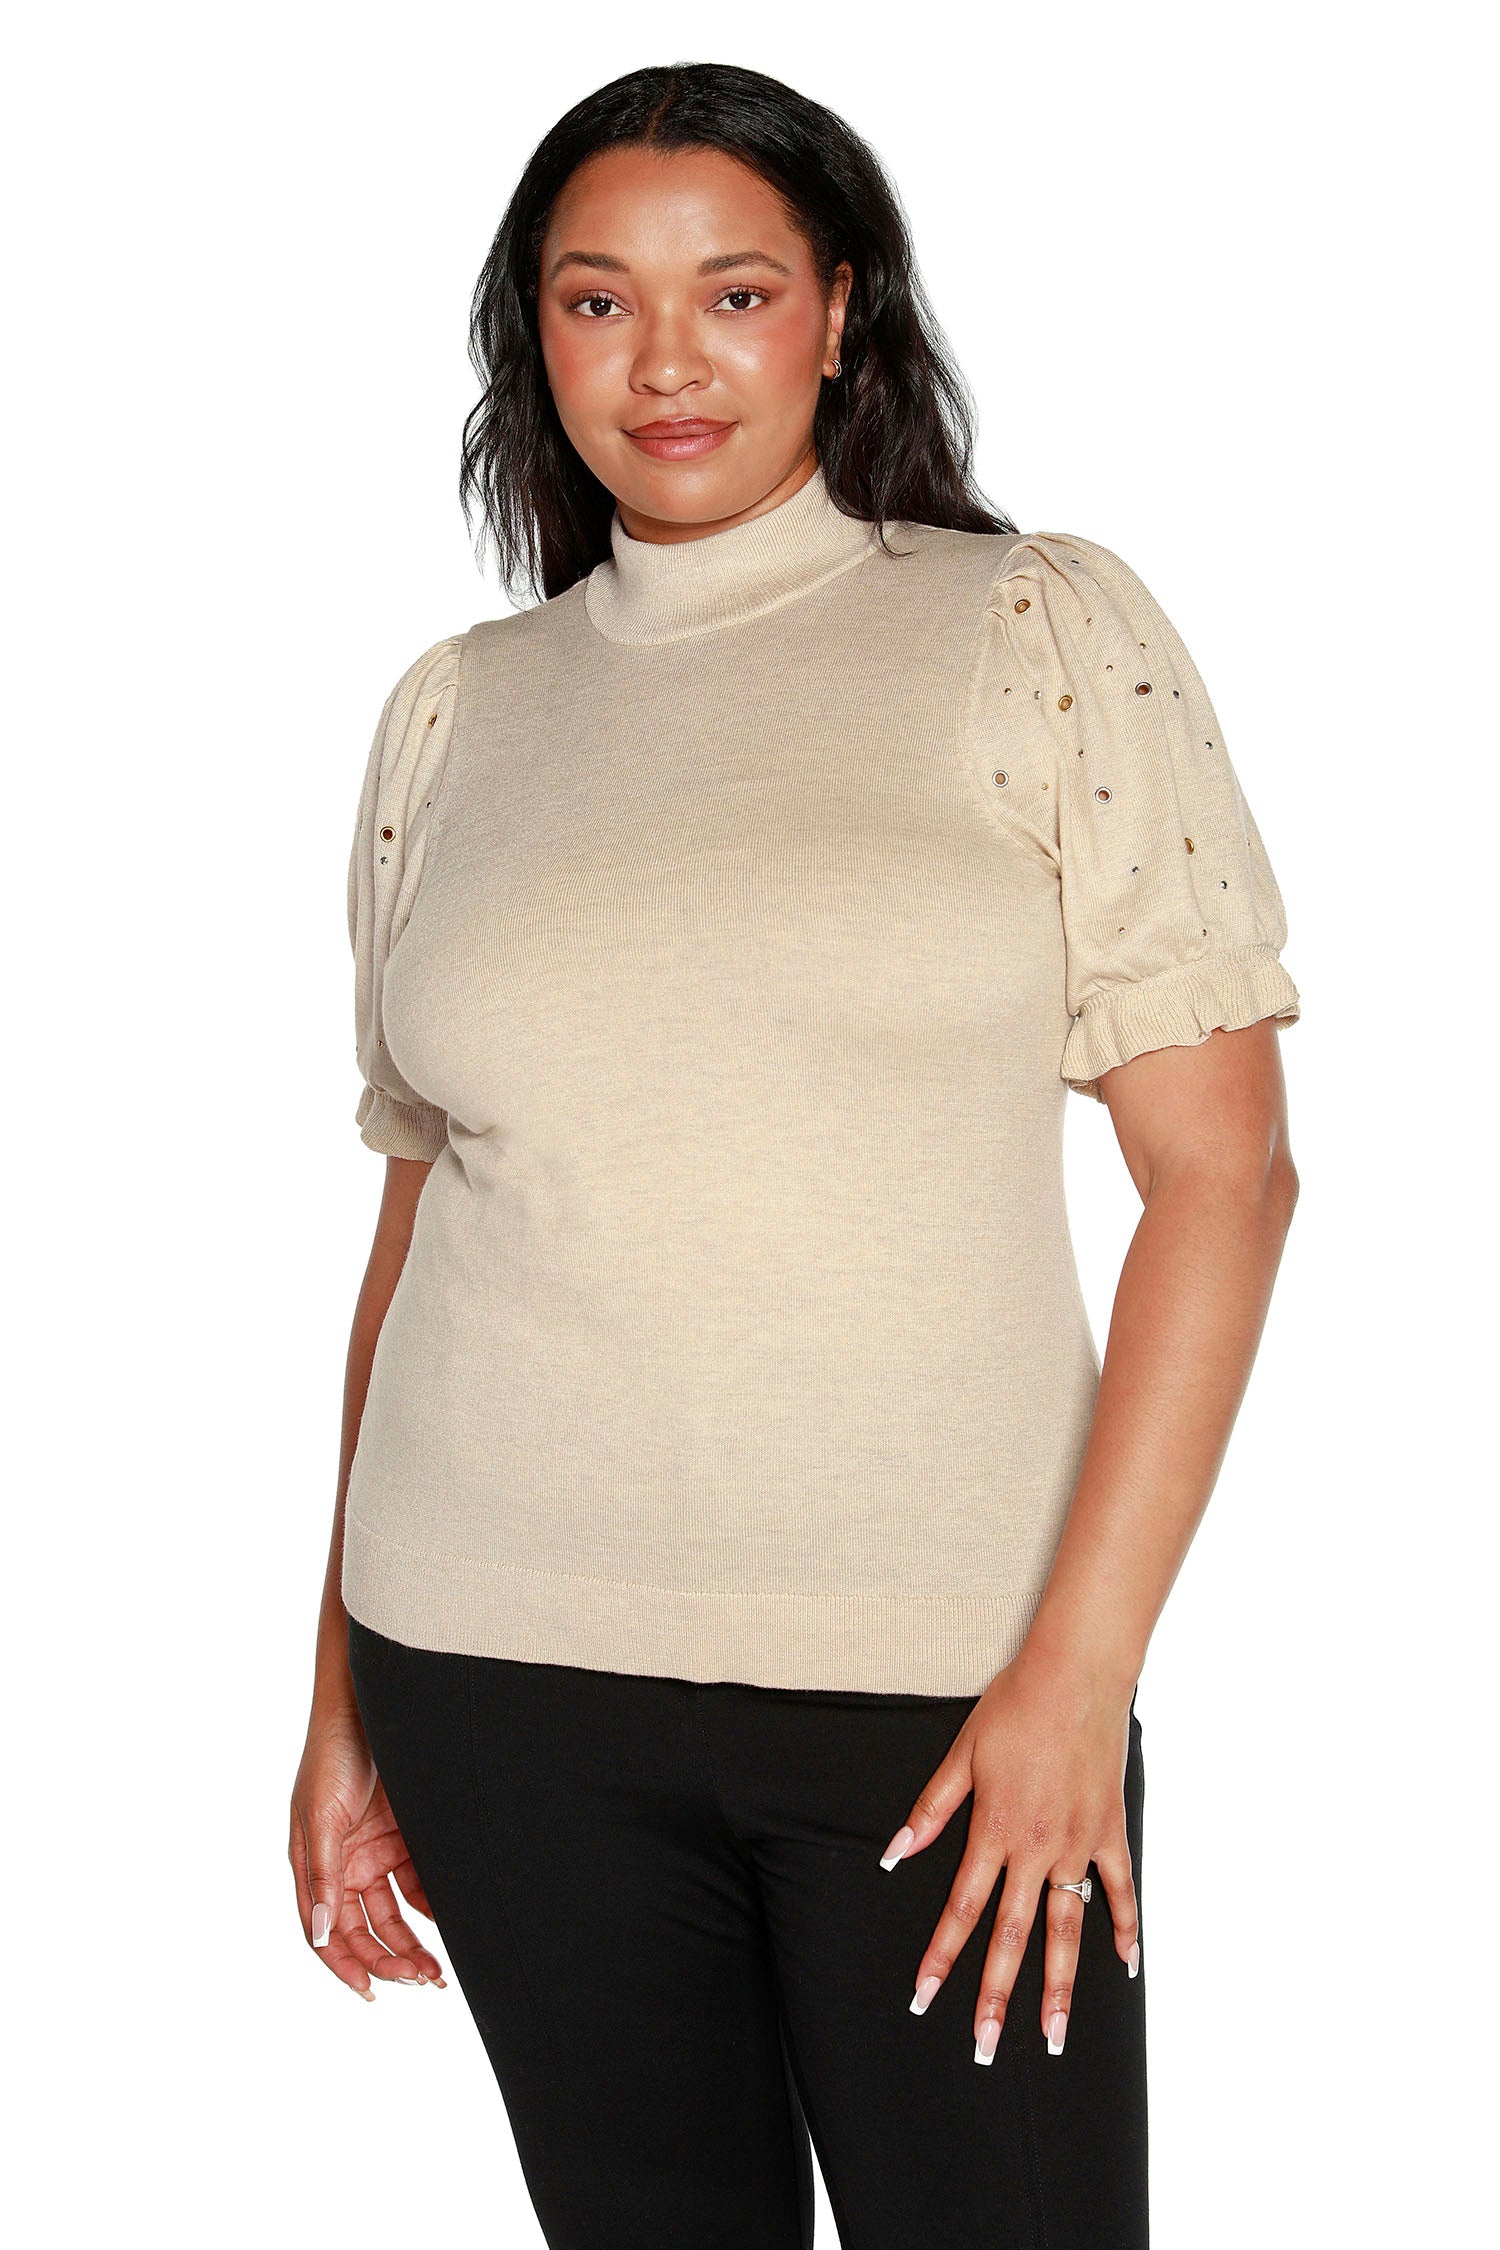 Women's Mock Neck Puff Sleeve Sweater with Grommet and Rhinestone Details | Curvy